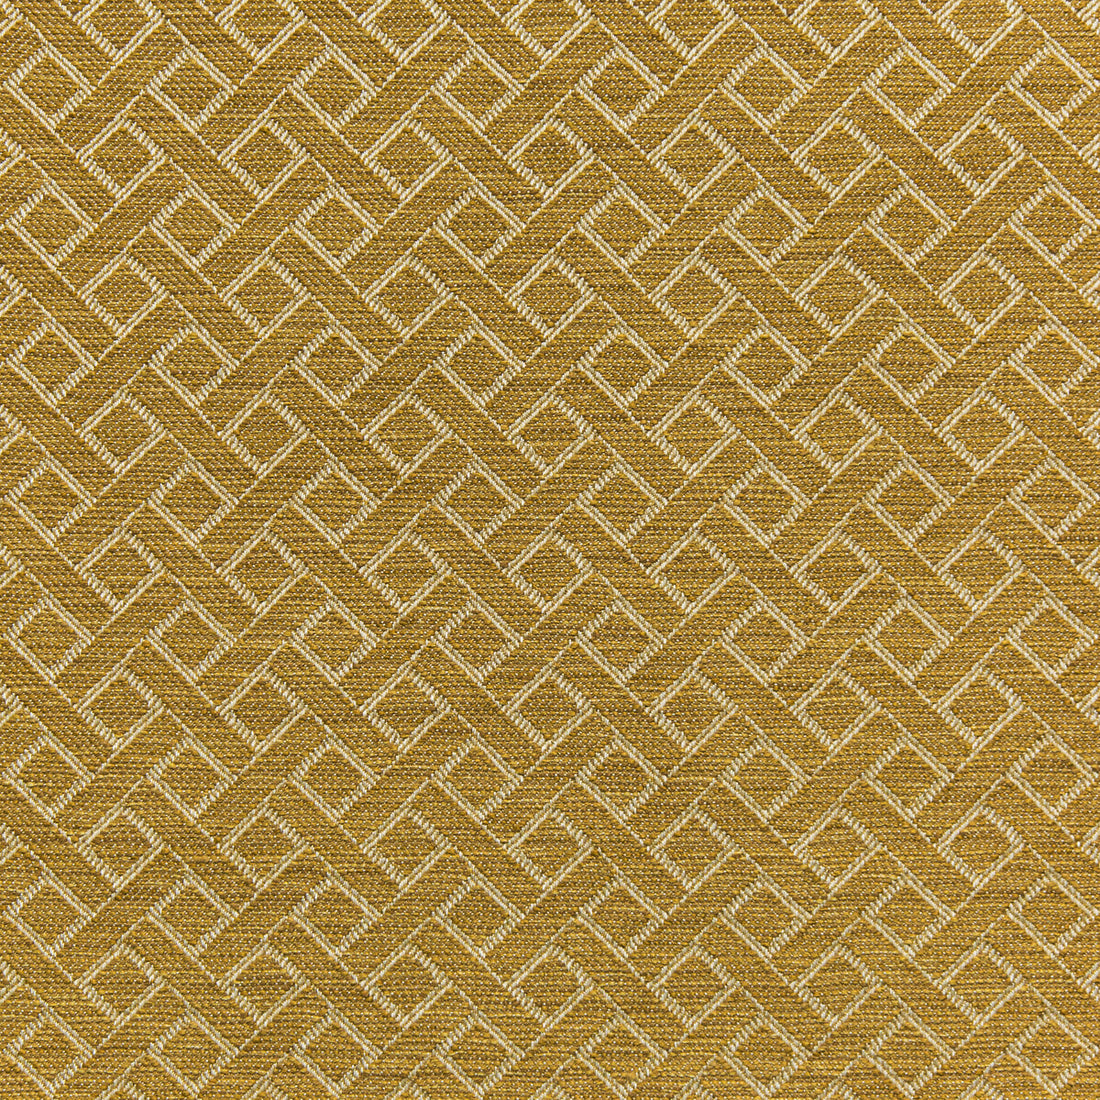 Maldon Weave fabric in gold color - pattern 2020102.4.0 - by Lee Jofa in the Linford Weaves collection